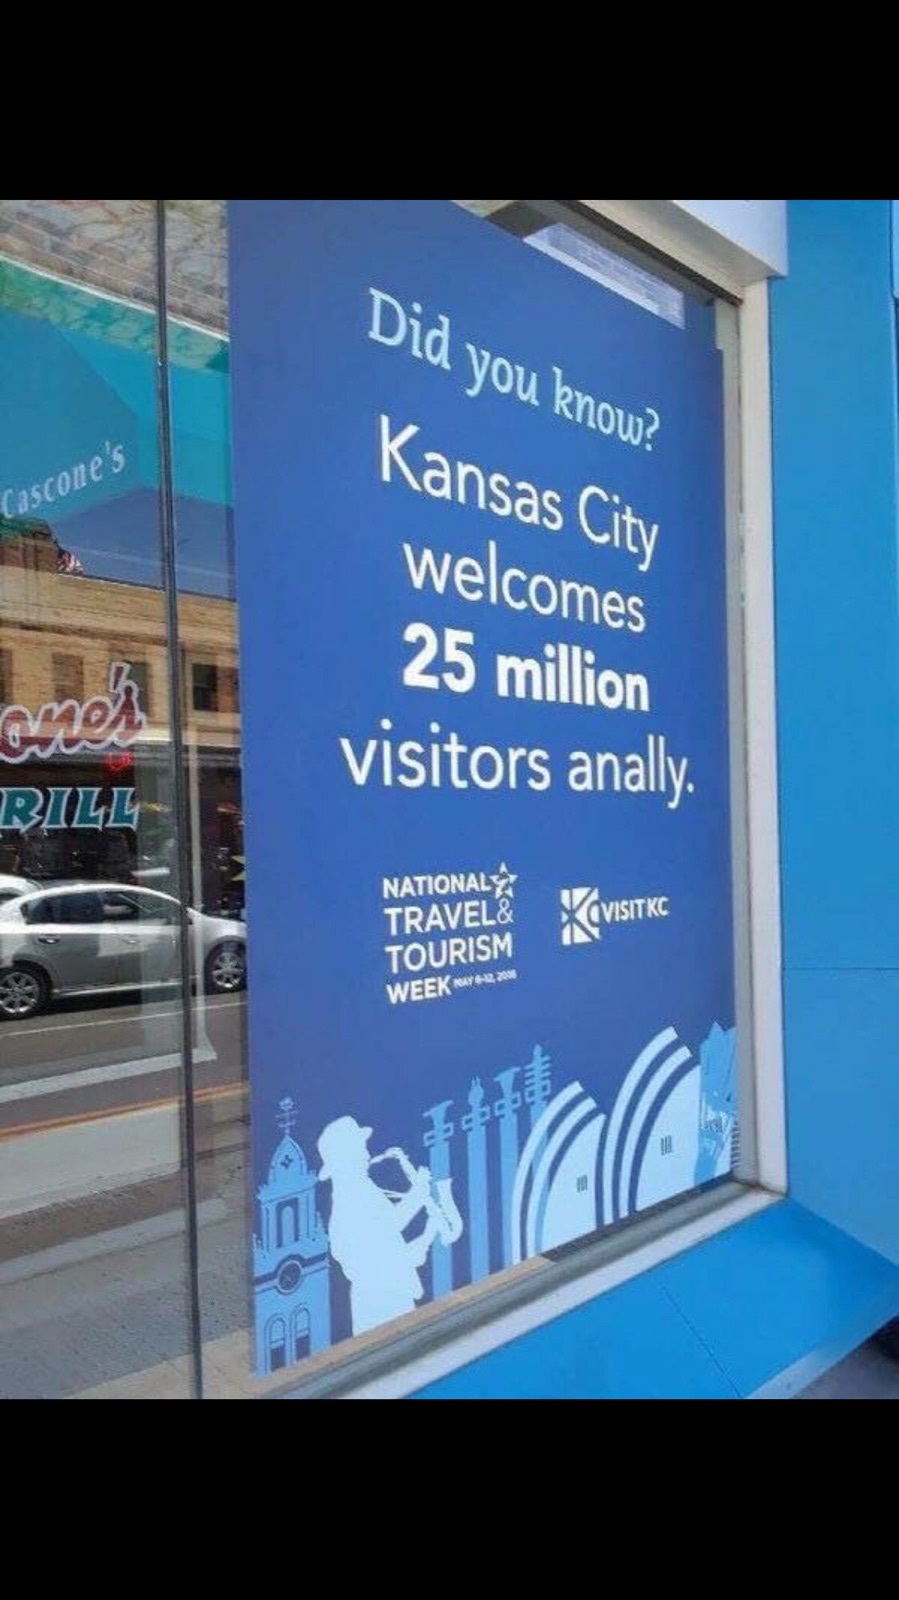 Guess my next vacation is to Kansas City - meme